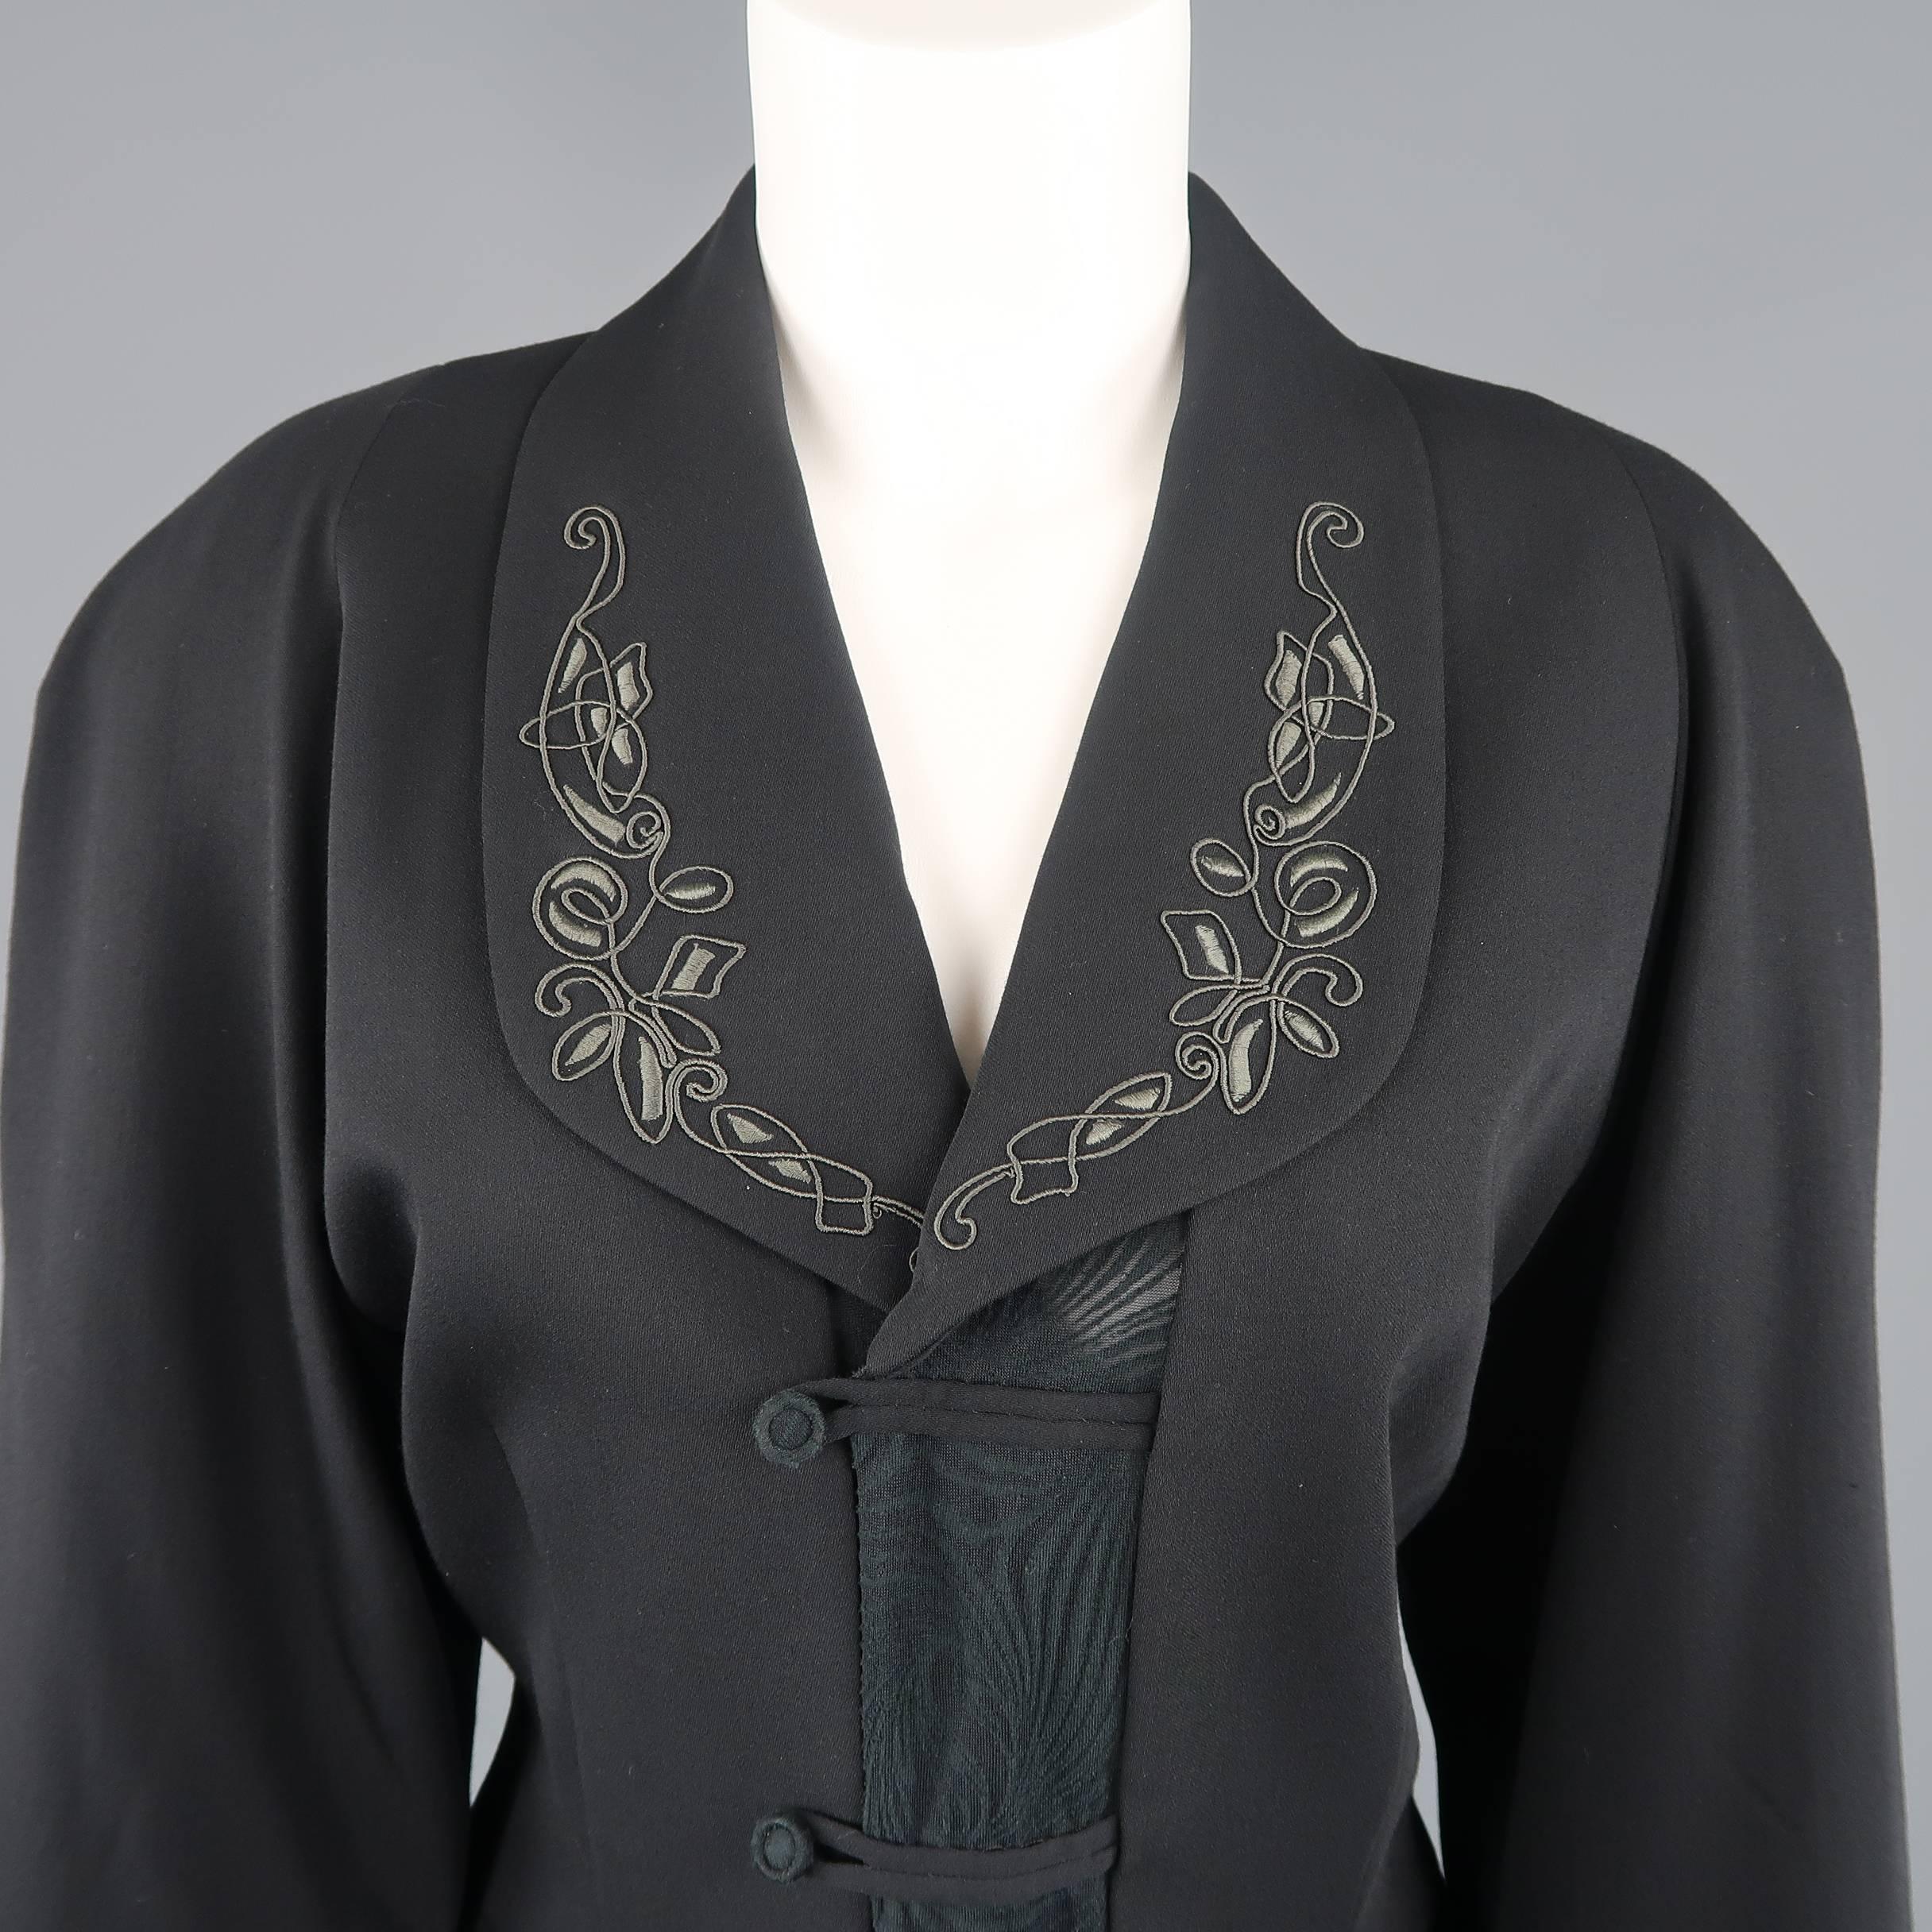 Vintage Matsuda jacket comes in black wool with padded shoulder, embroidered shawl collar, double breasted closure, and moire print burnout jersey peplum panel. Made in Japan.
 
Good Pre-Owned Condition.
Marked: (no size)
 
Measurements:
 
Shoulder: